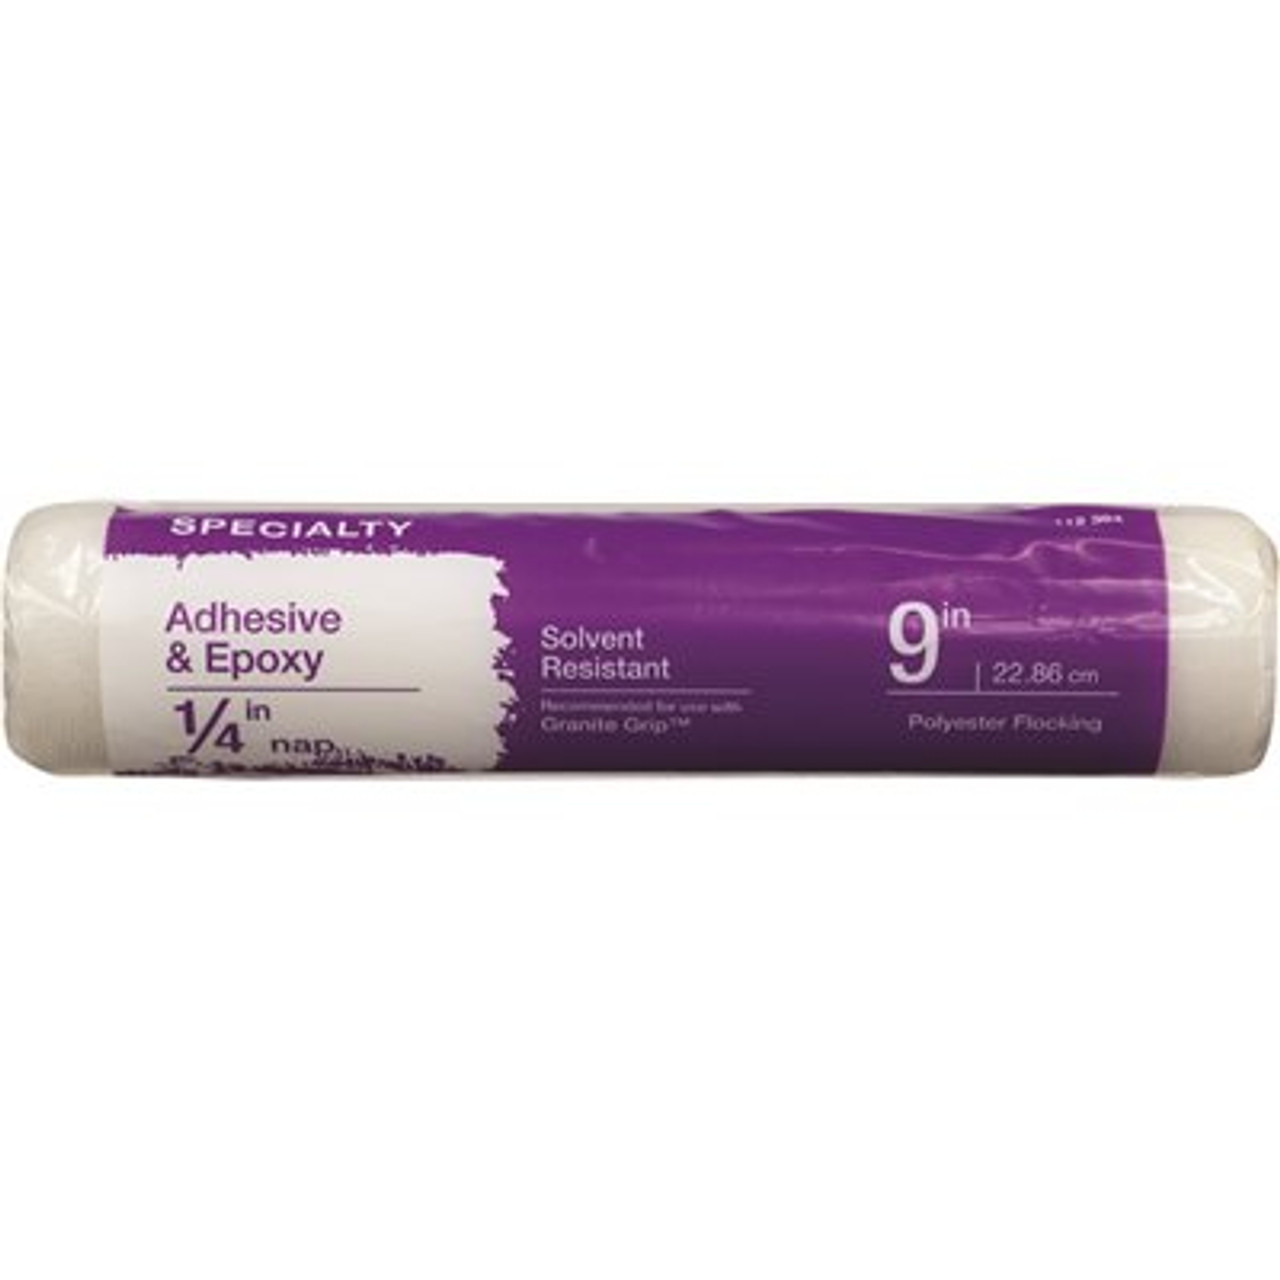 9 in. x 1/4 in. Polyester Adhesive and Epoxy Roller